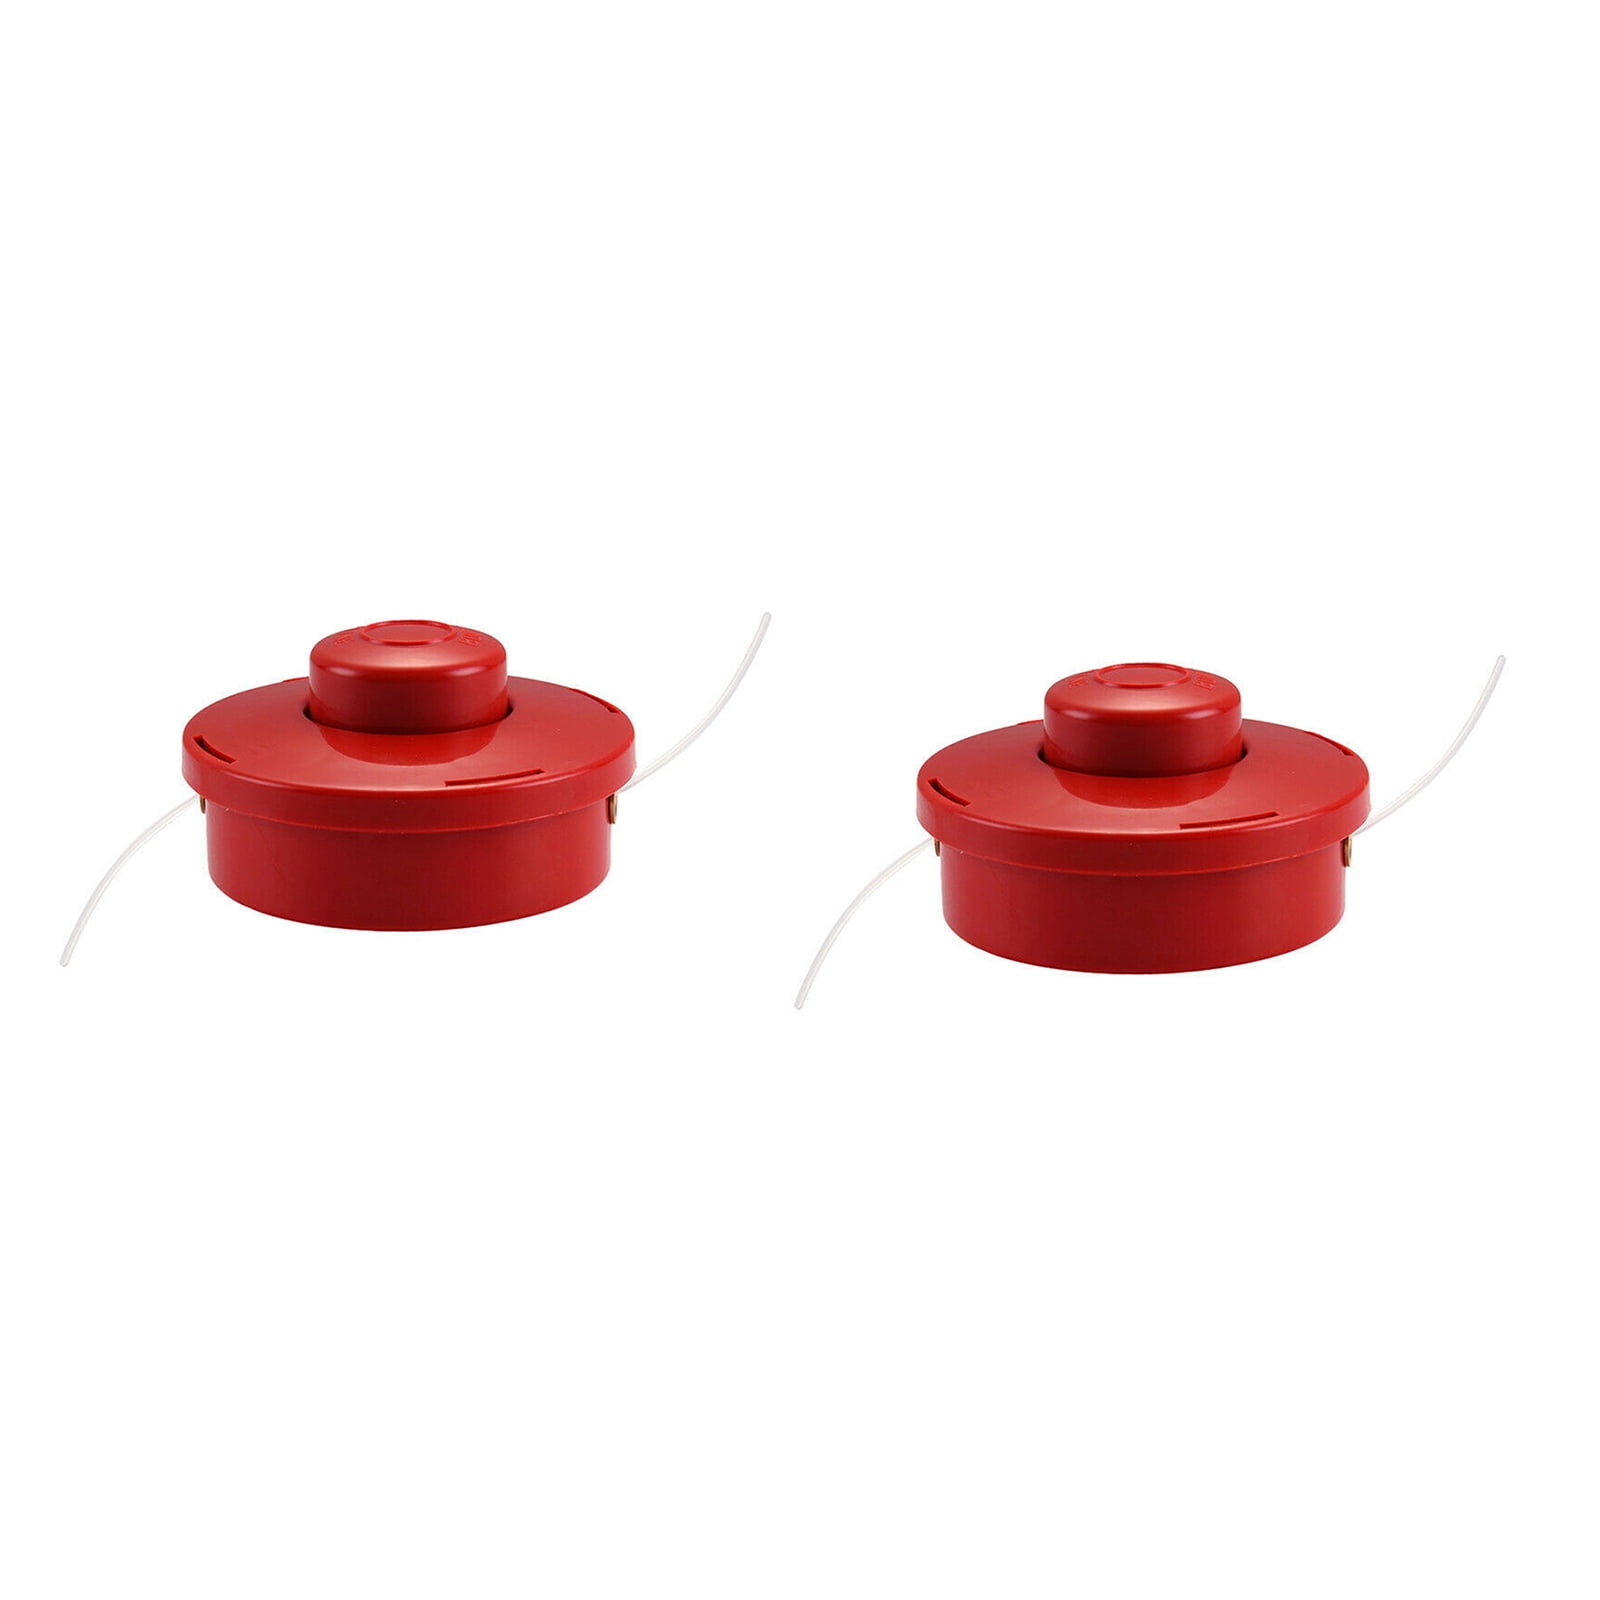 3x Nylon General Mower Bump Feed Line Spool Head For Strimmer with Cut Rope